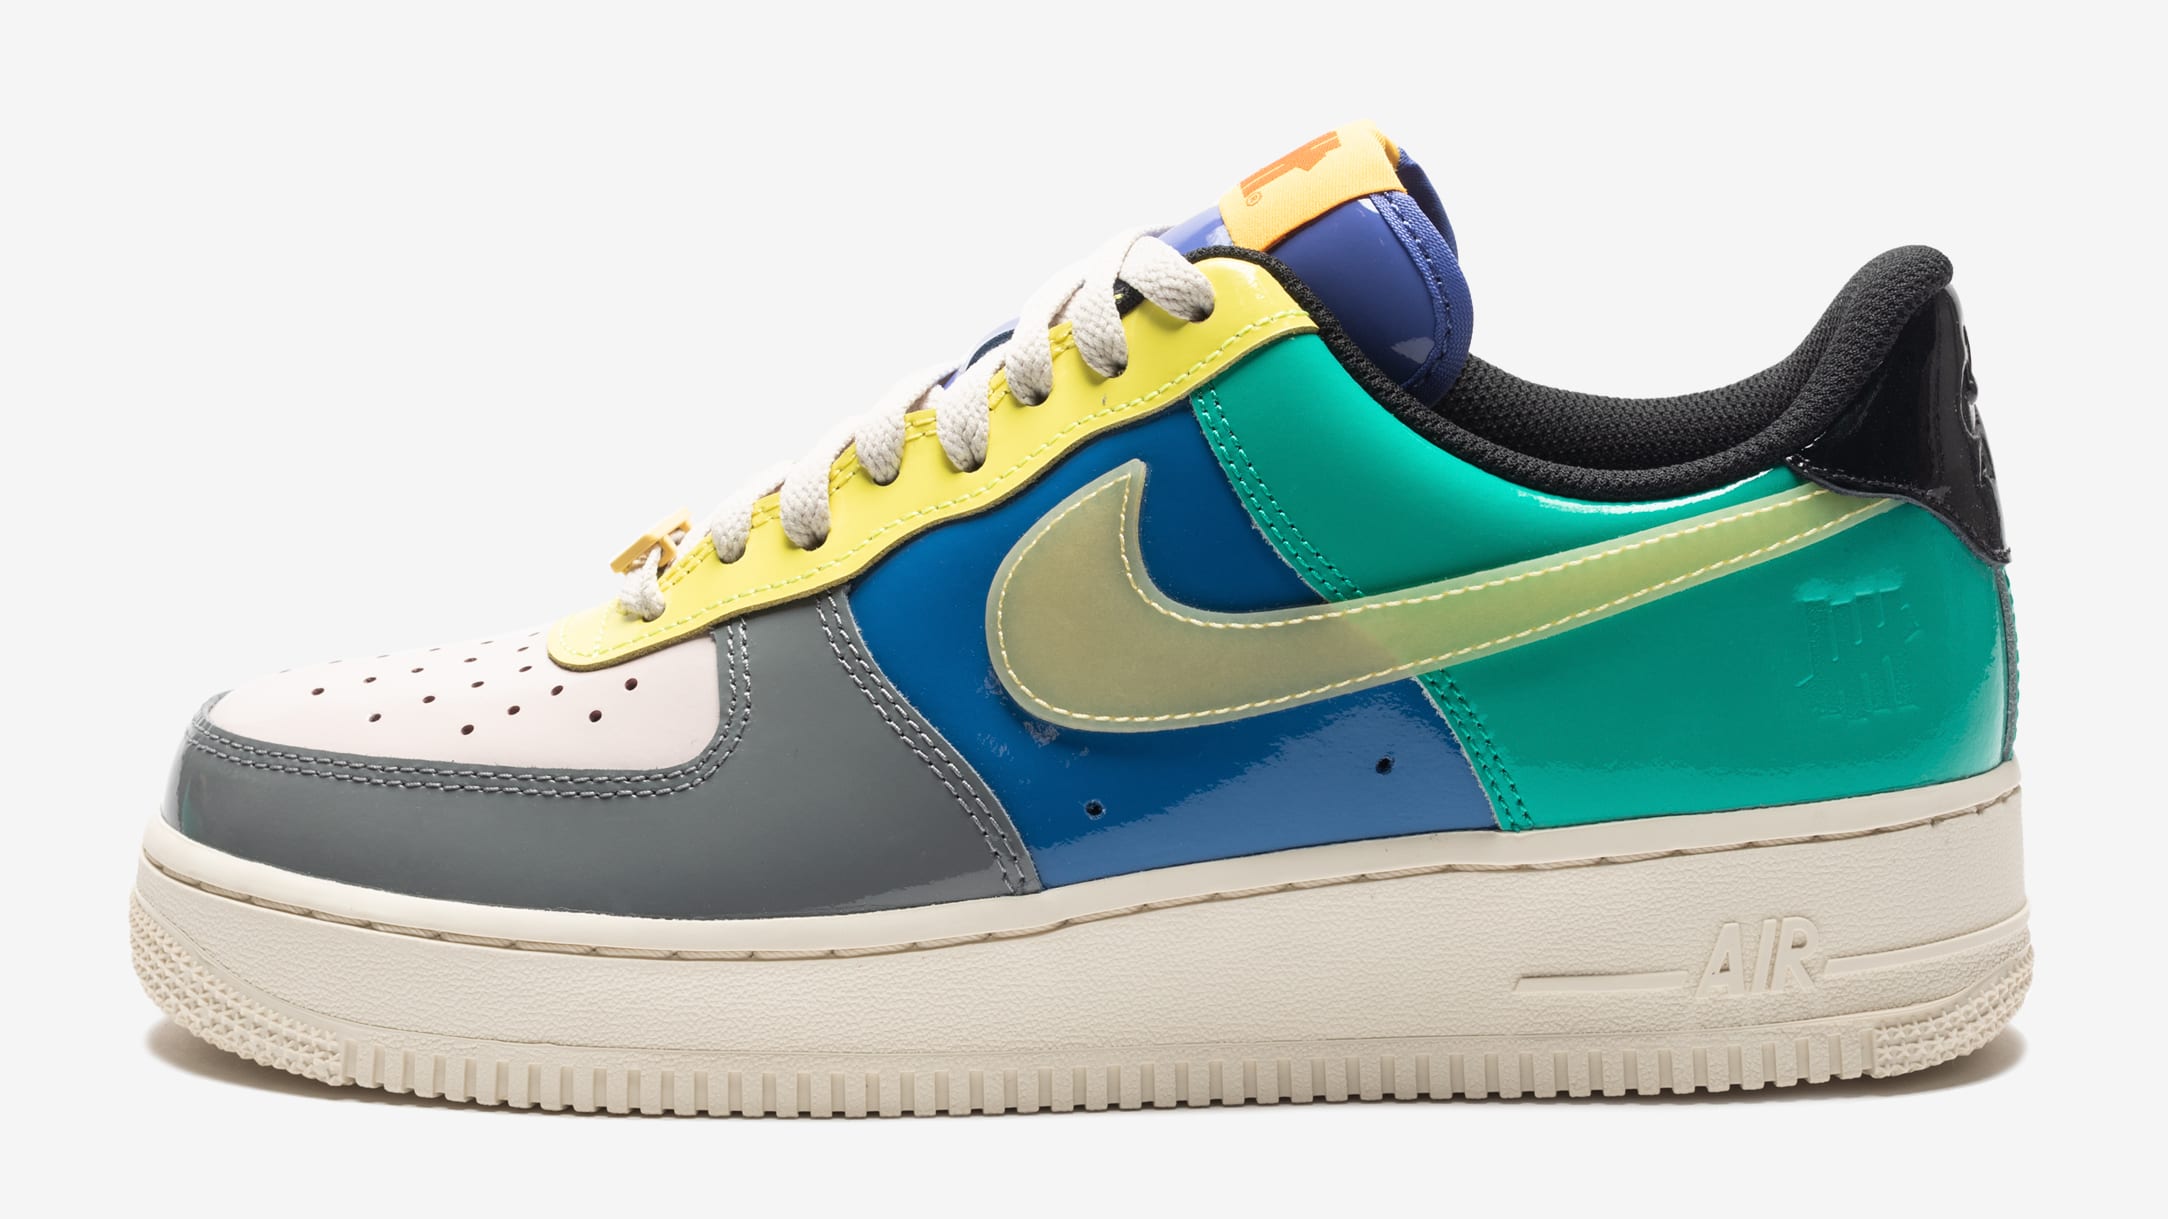 Undefeated x Nike Air Force 1 Low Topaz Gold DV5255-001 Profile